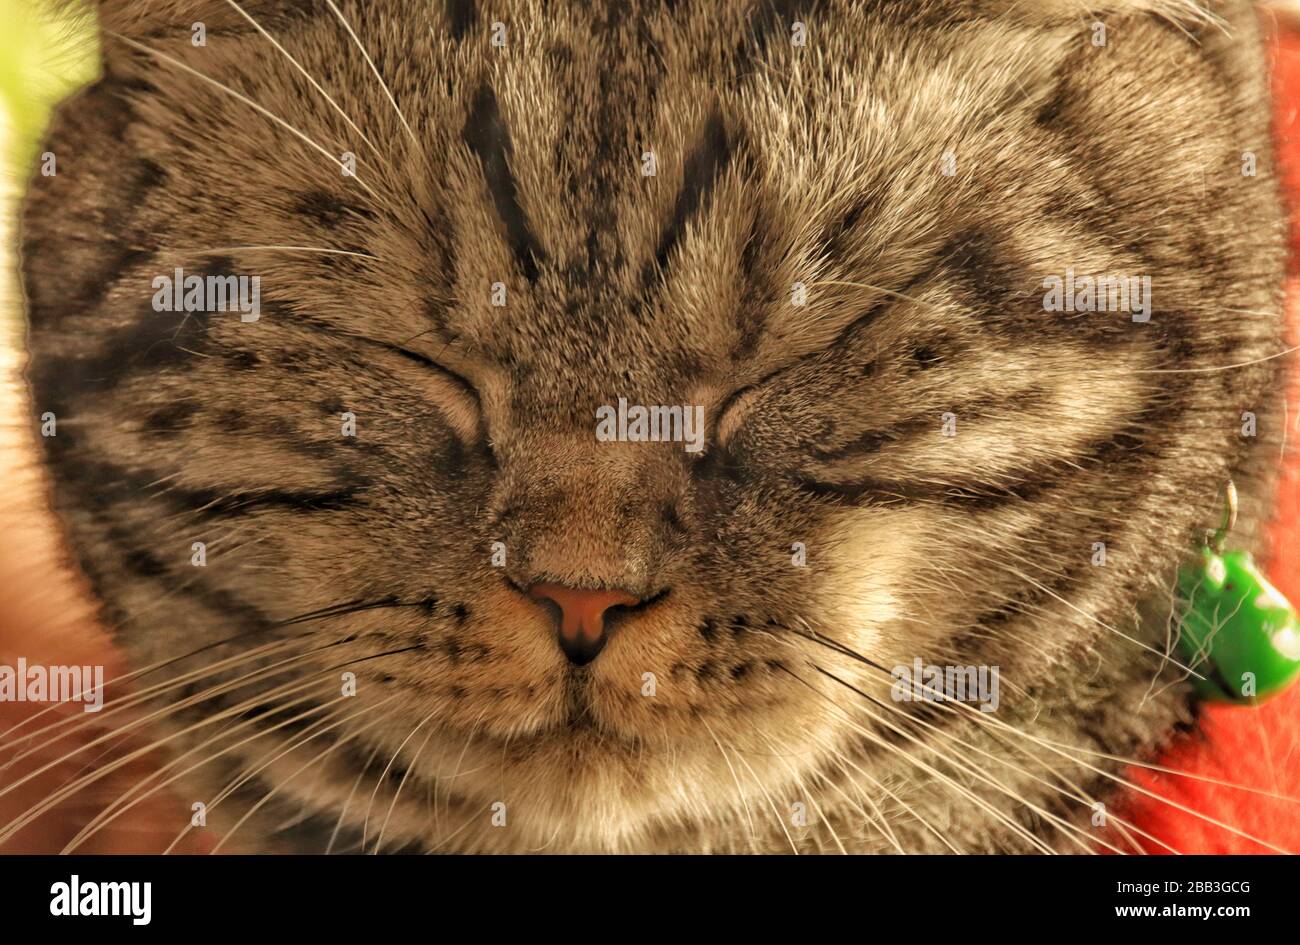 Fluffy and sleepy bored cat during home quarantine and self isolation due to the global outbreak of covid-19 pandemic Stock Photo